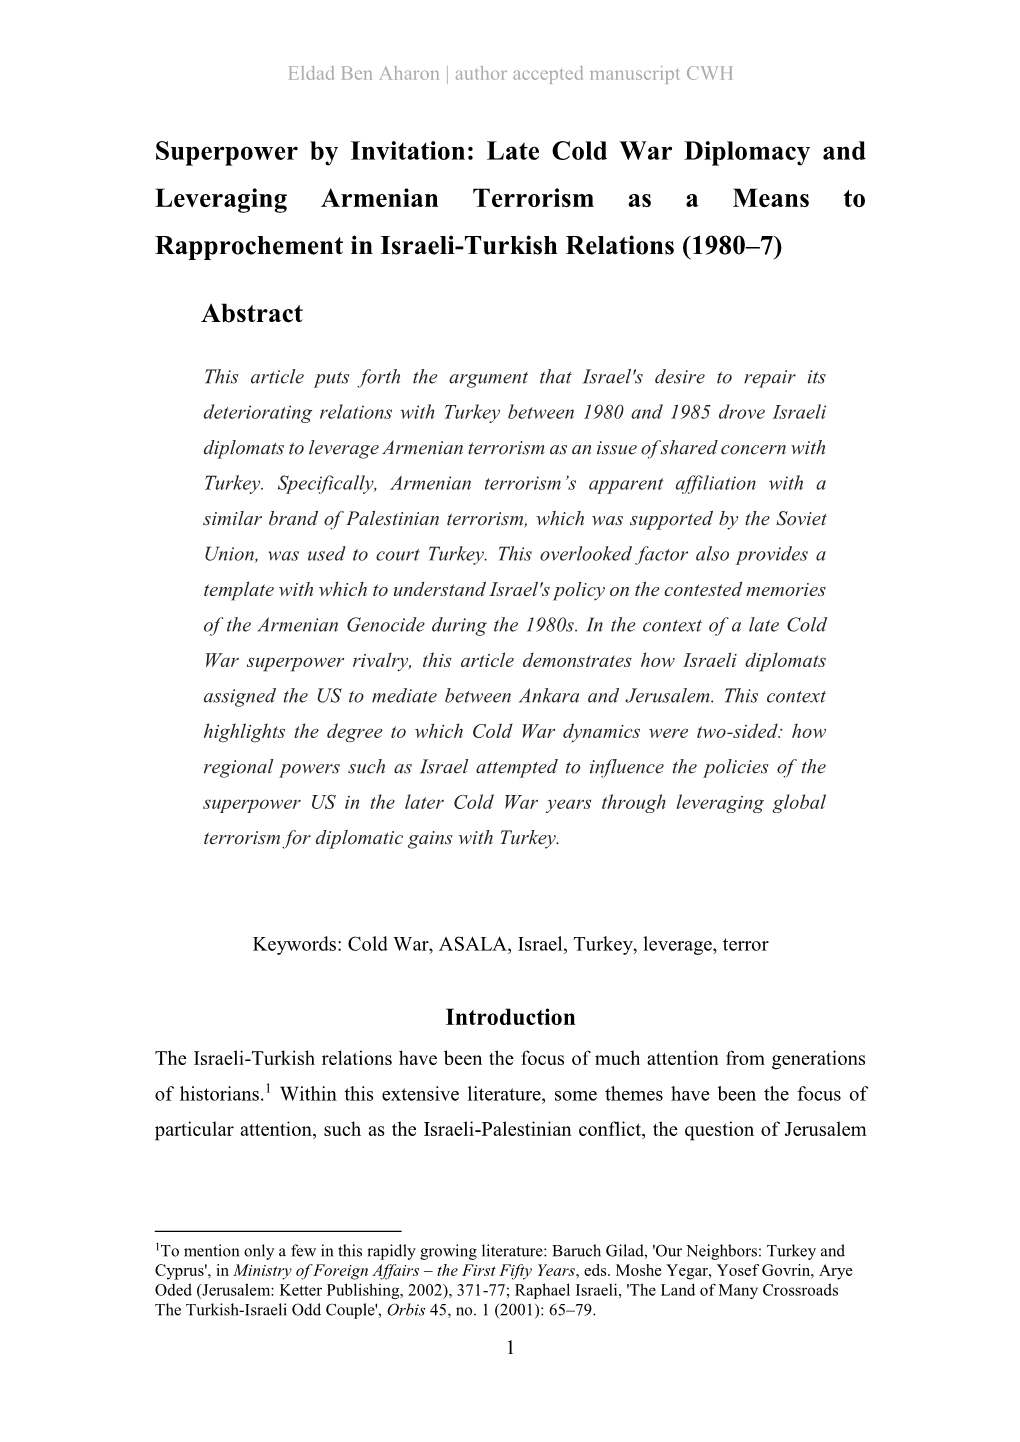 Late Cold War Diplomacy and Leveraging Armenian Terrorism As a Means to Rapprochement in Israeli-Turkish Relations (1980–7)